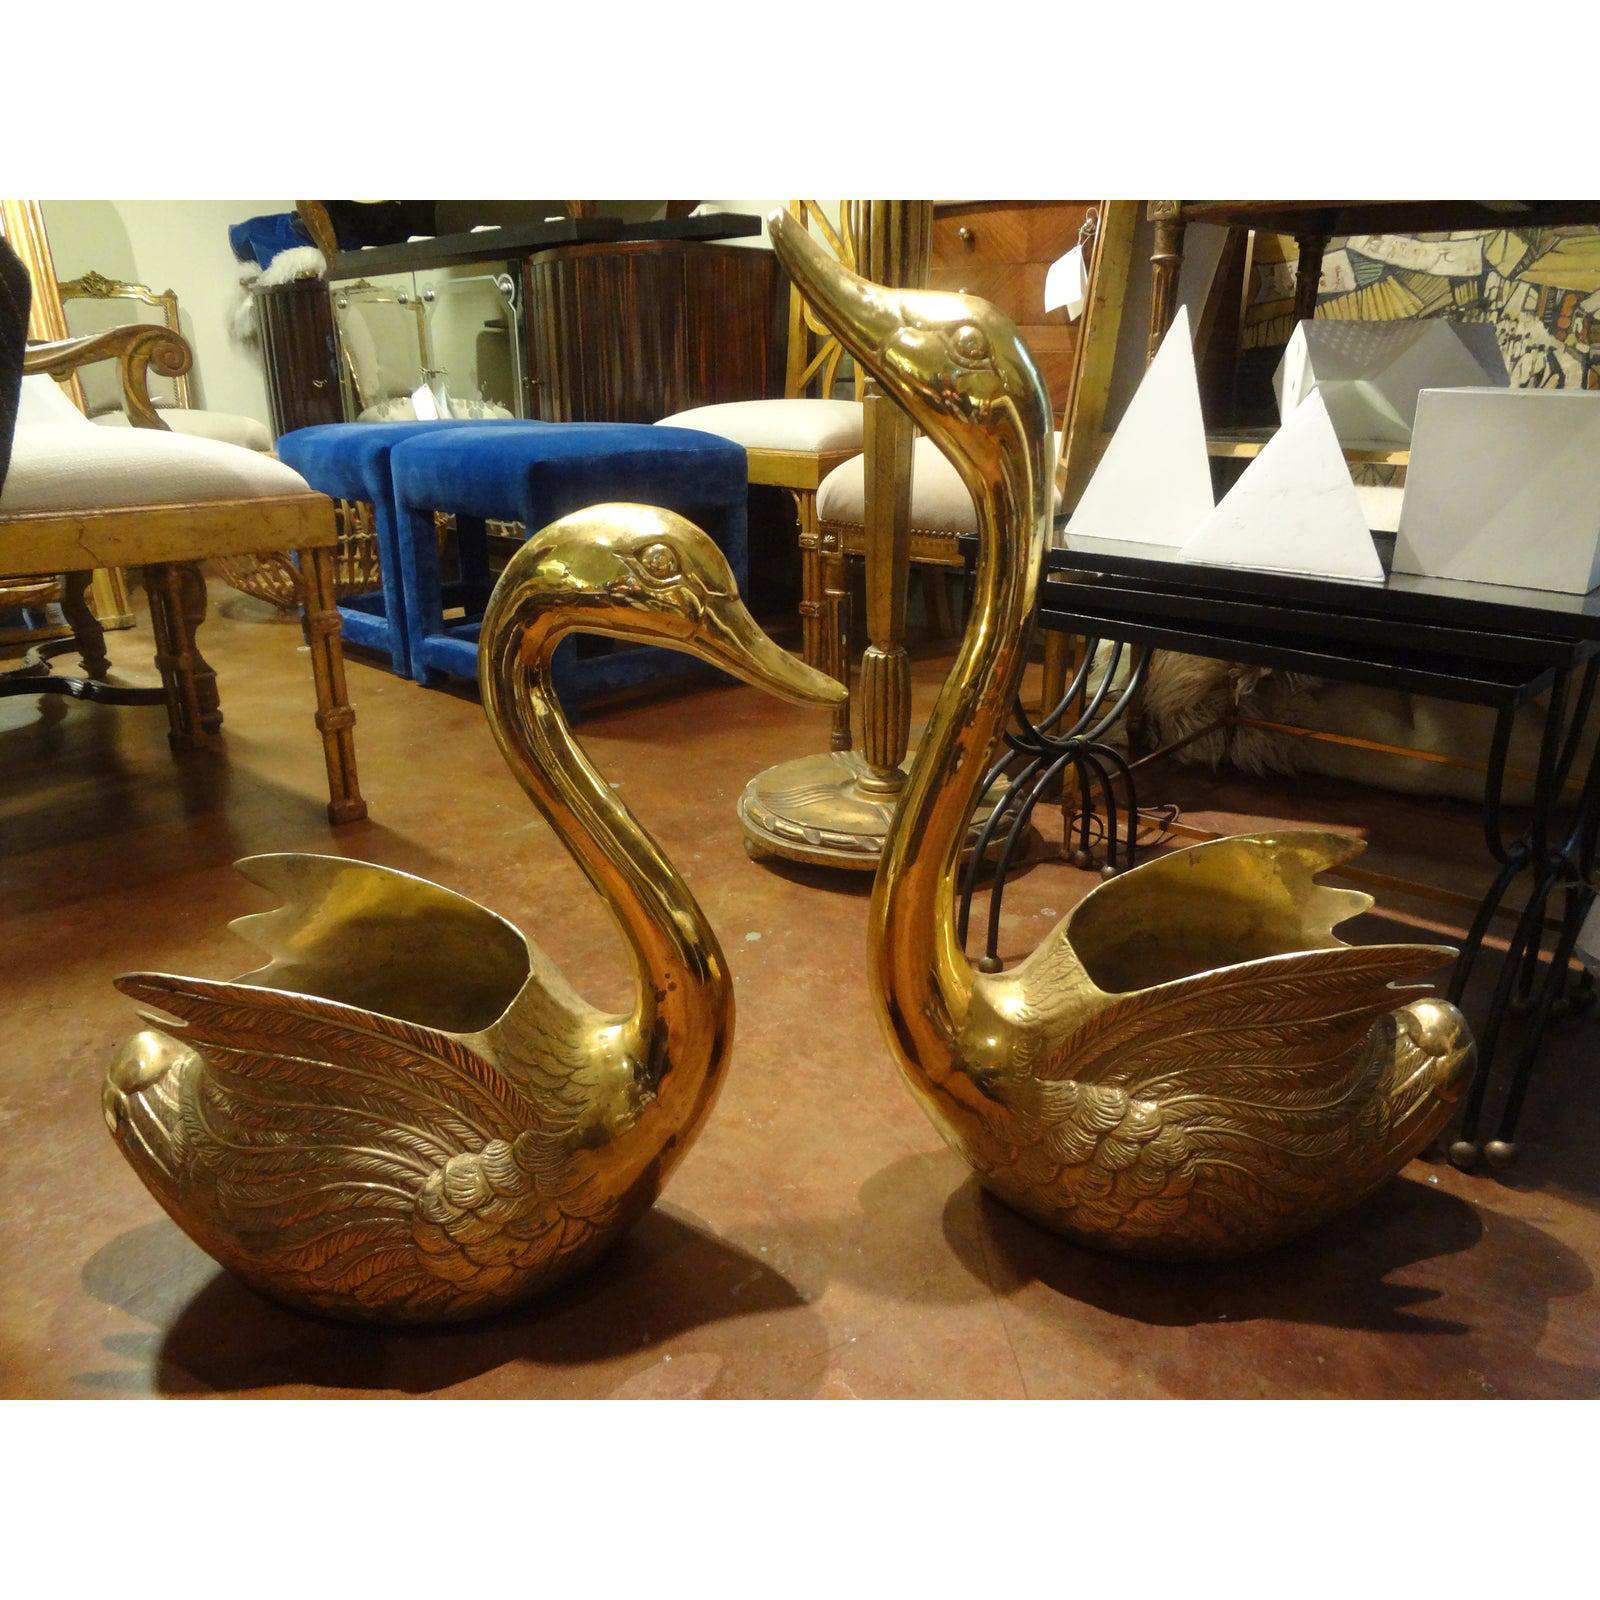 Pair of Vintage brass swan planters.
Monumental pair of Hollywood Regency brass swan planters, jardinières or cache pots. This beautiful pair of midcentury brass swans are large enough to display your favorite orchid plants or seasonal favorites.